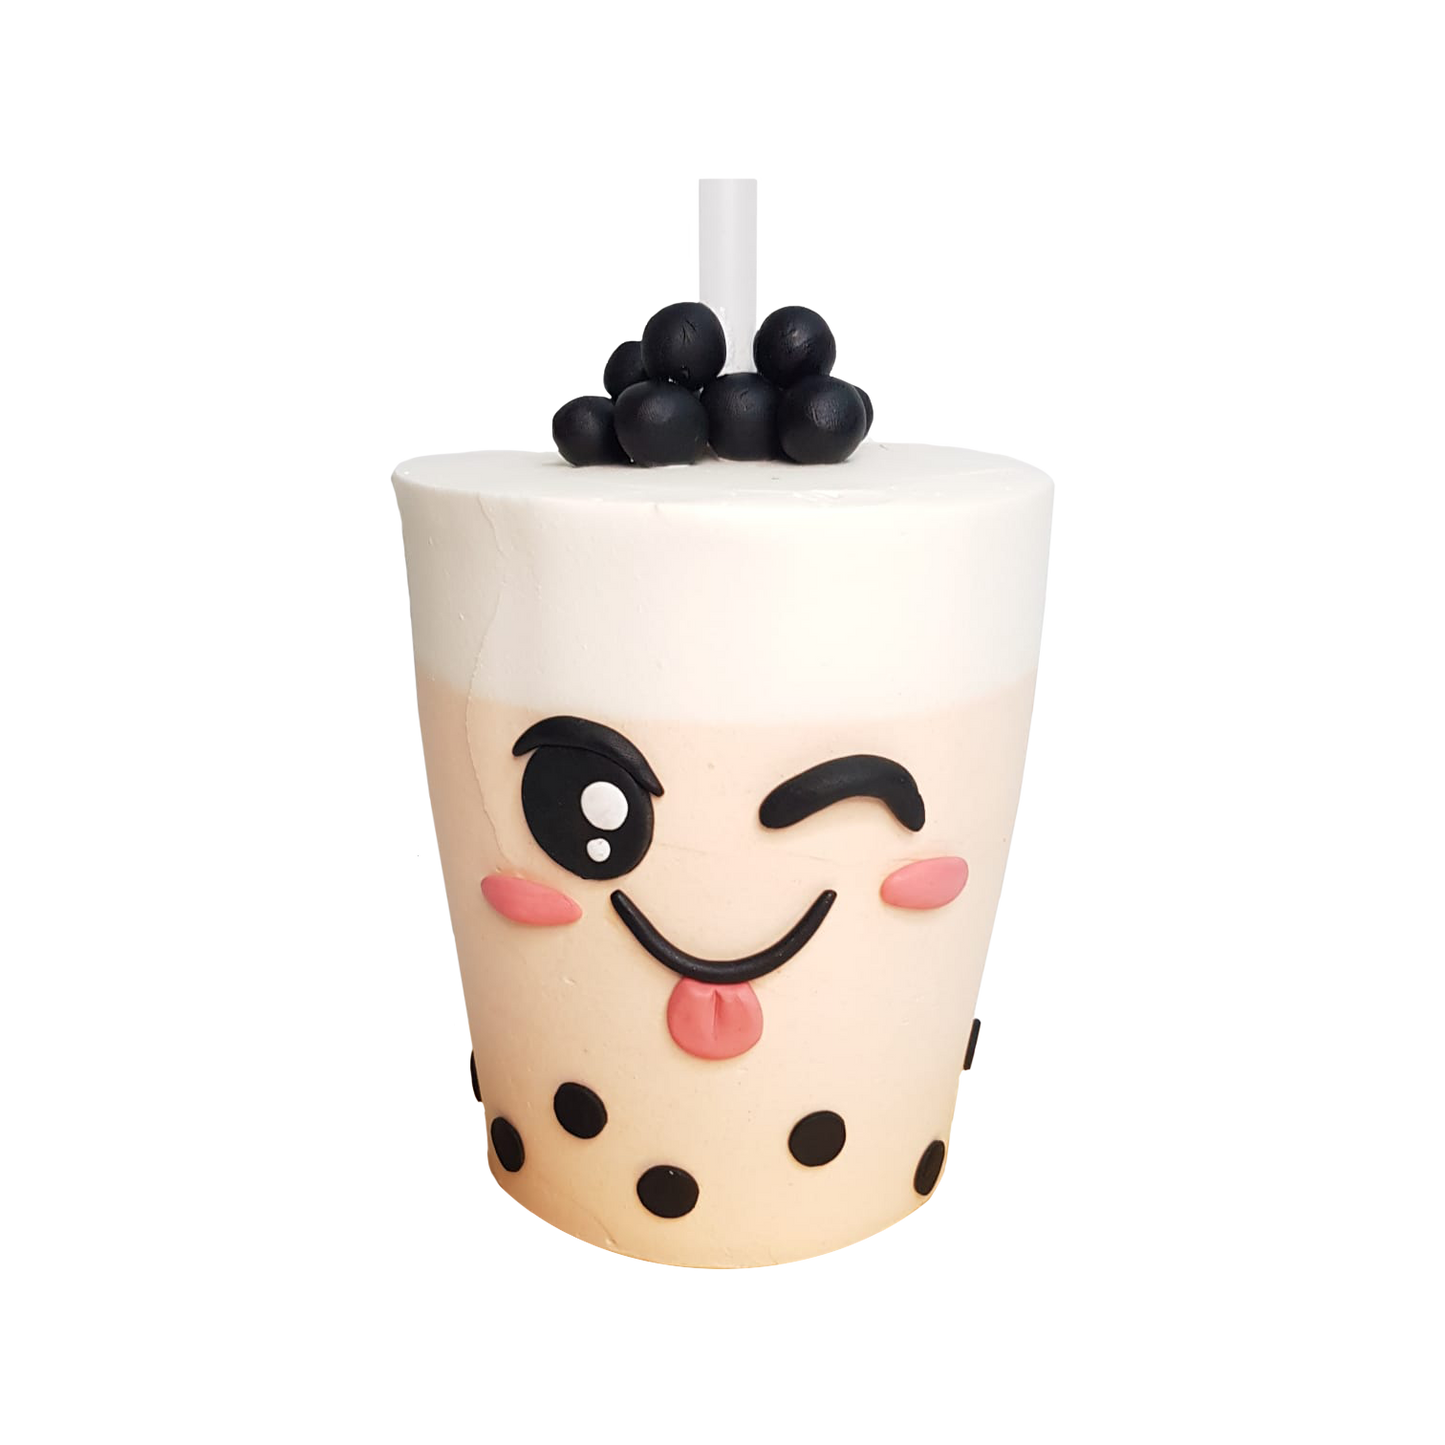 Real Bubble Tea Drink in a Cake 3